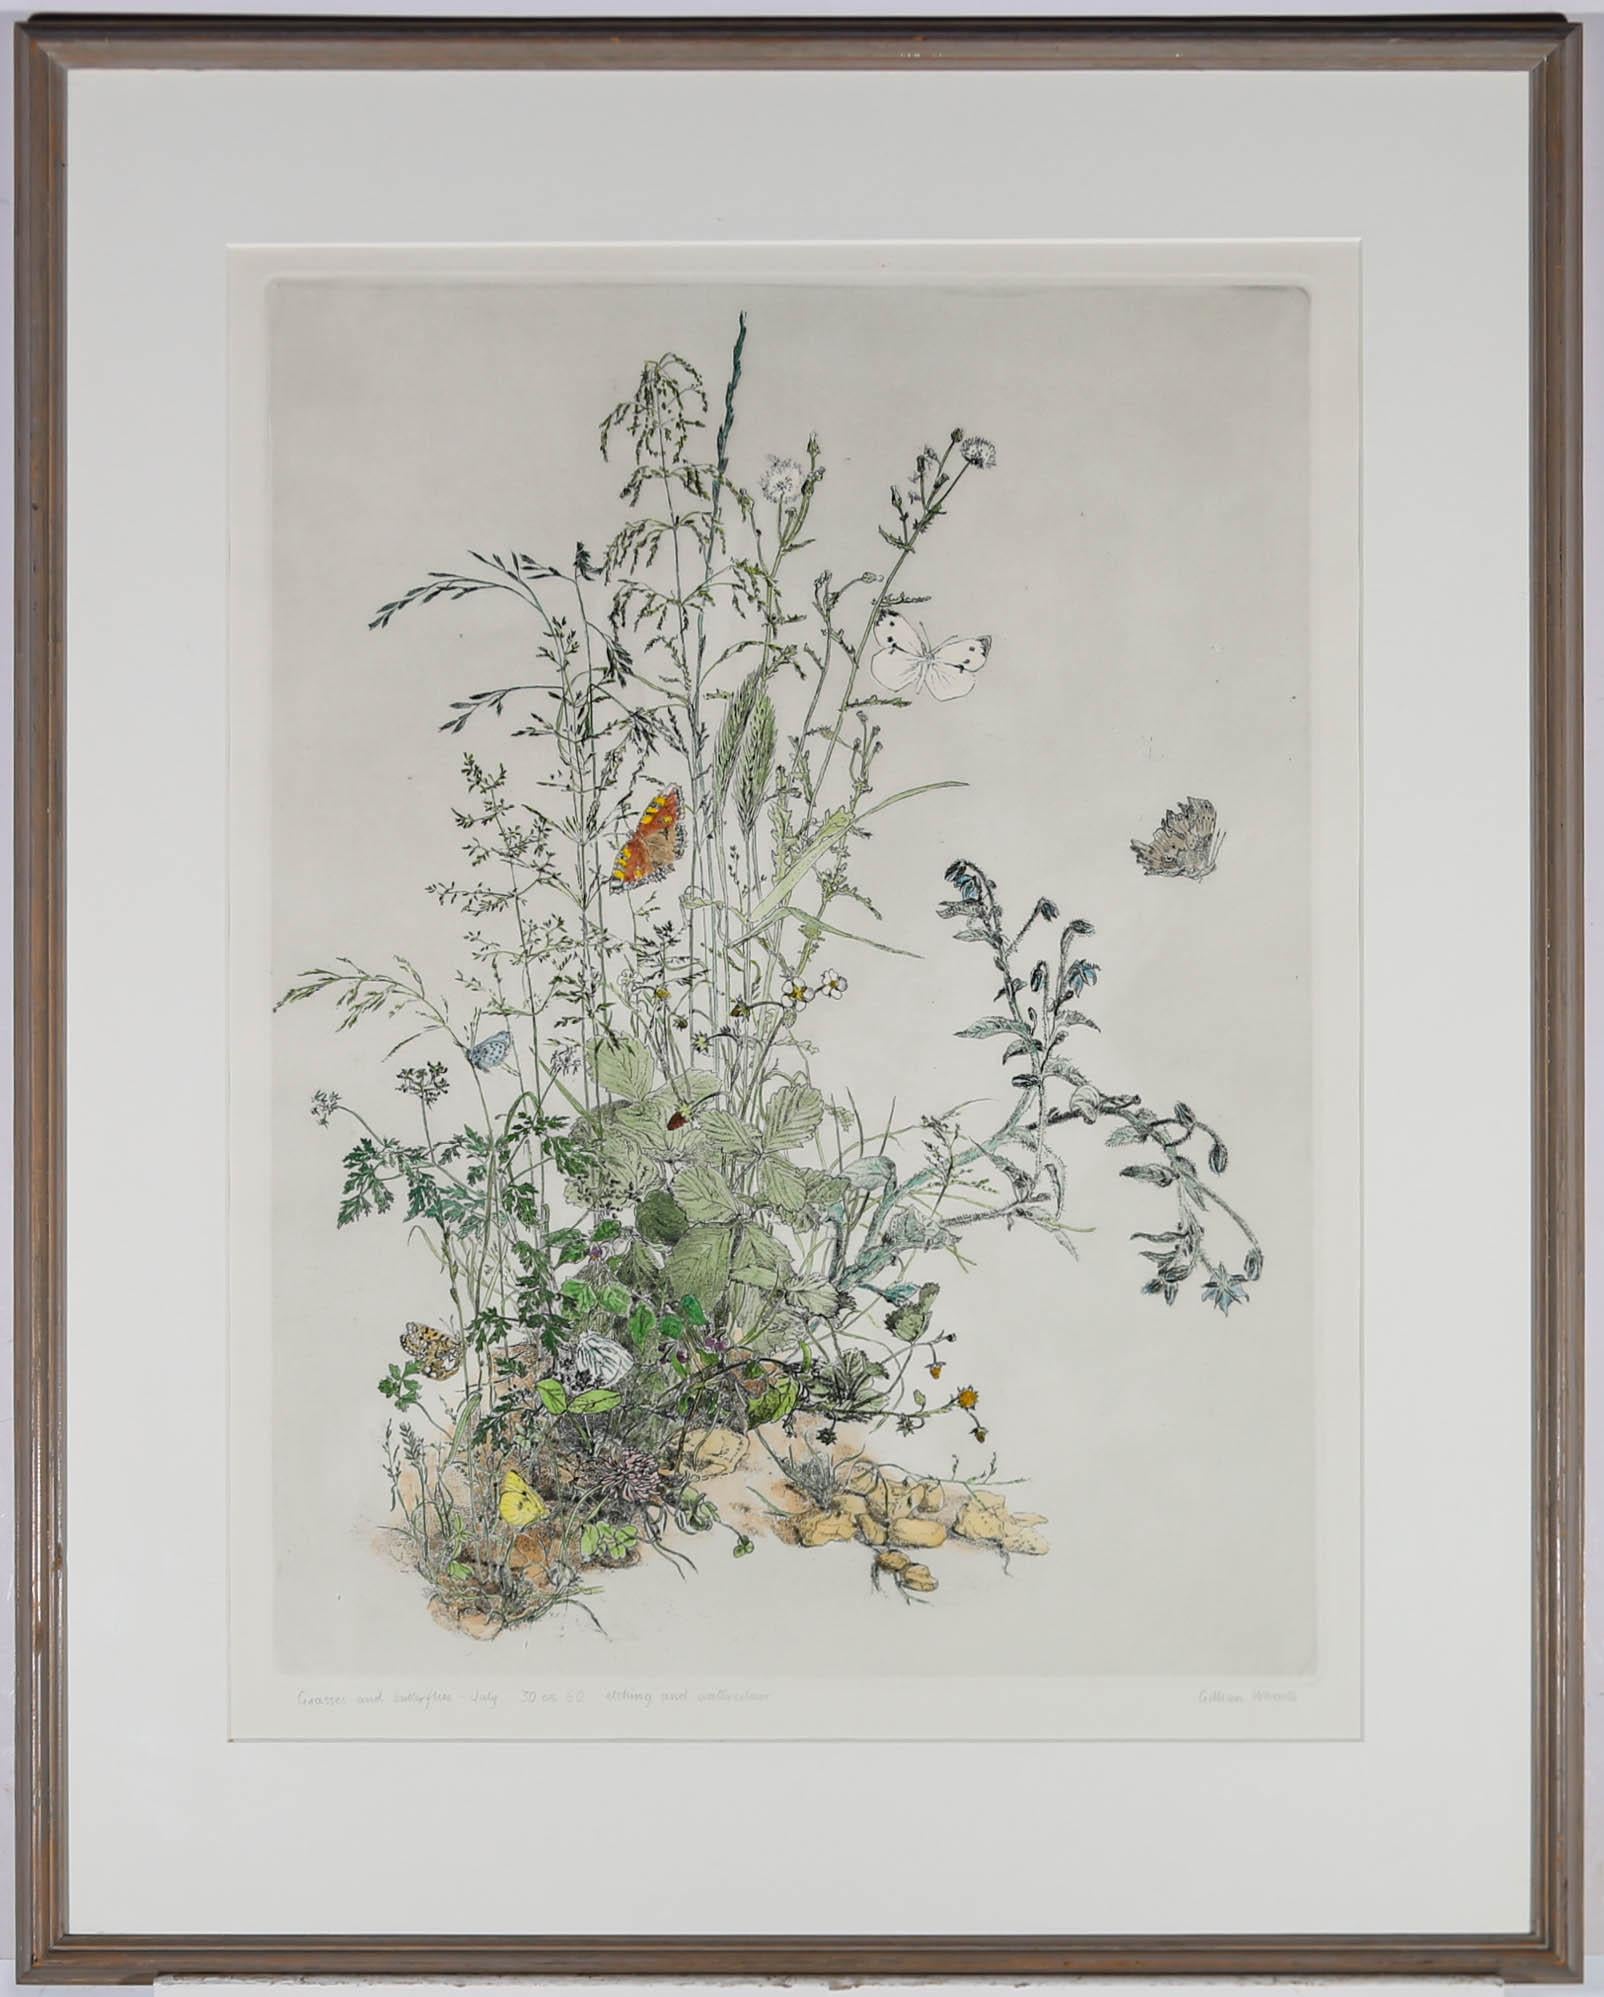 A charming etching with watercolour depicting a small patch of wildflowers with butterflies. Signed and titled below the plate lines. 30/60. Presented in a glazed wooden frame. On paper.
